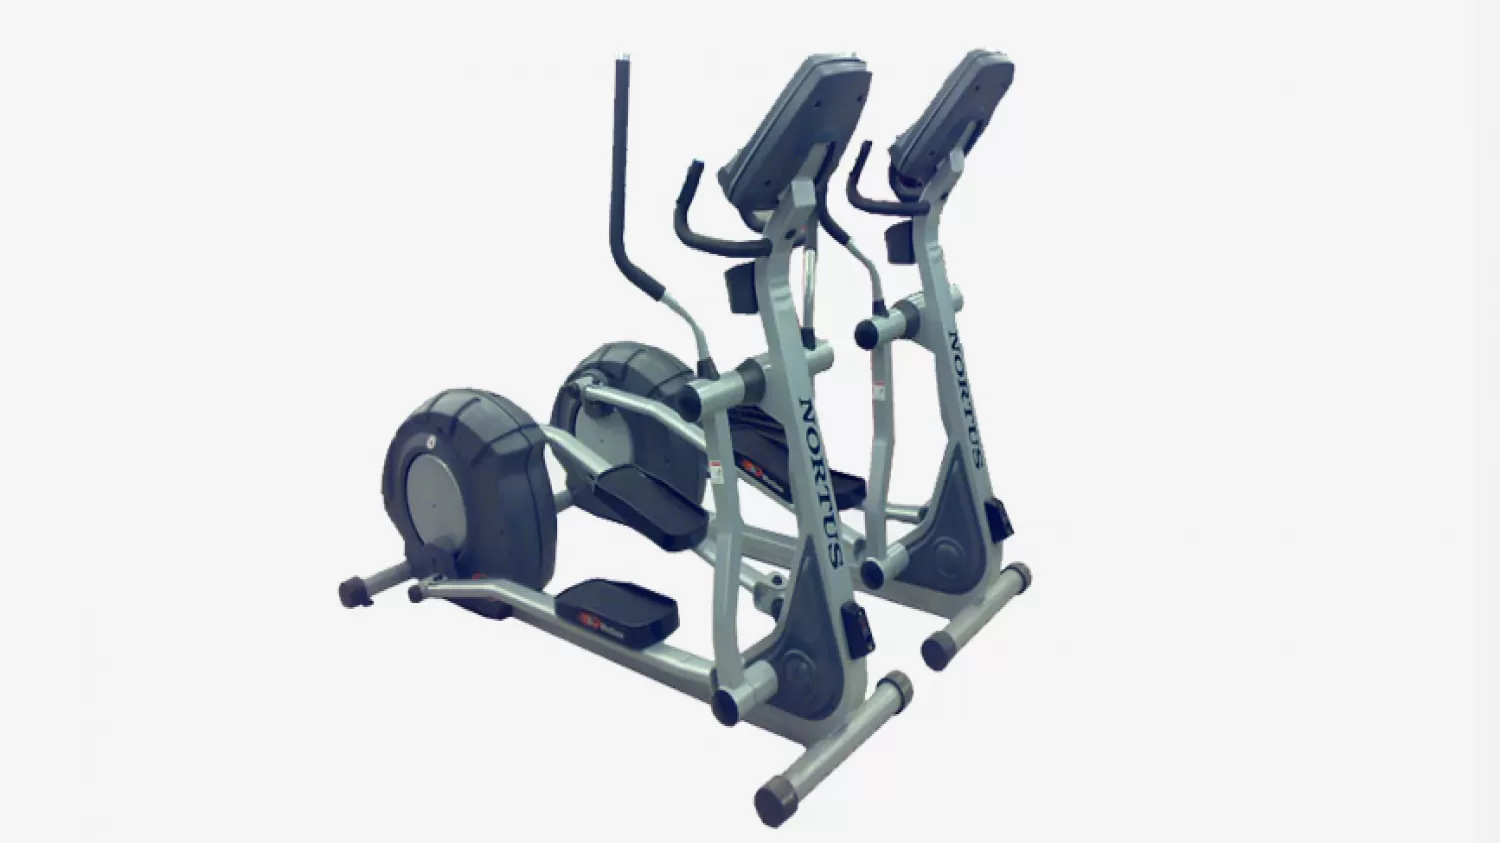 Read This Before You Buy Elliptical Machine for Commercial Gym